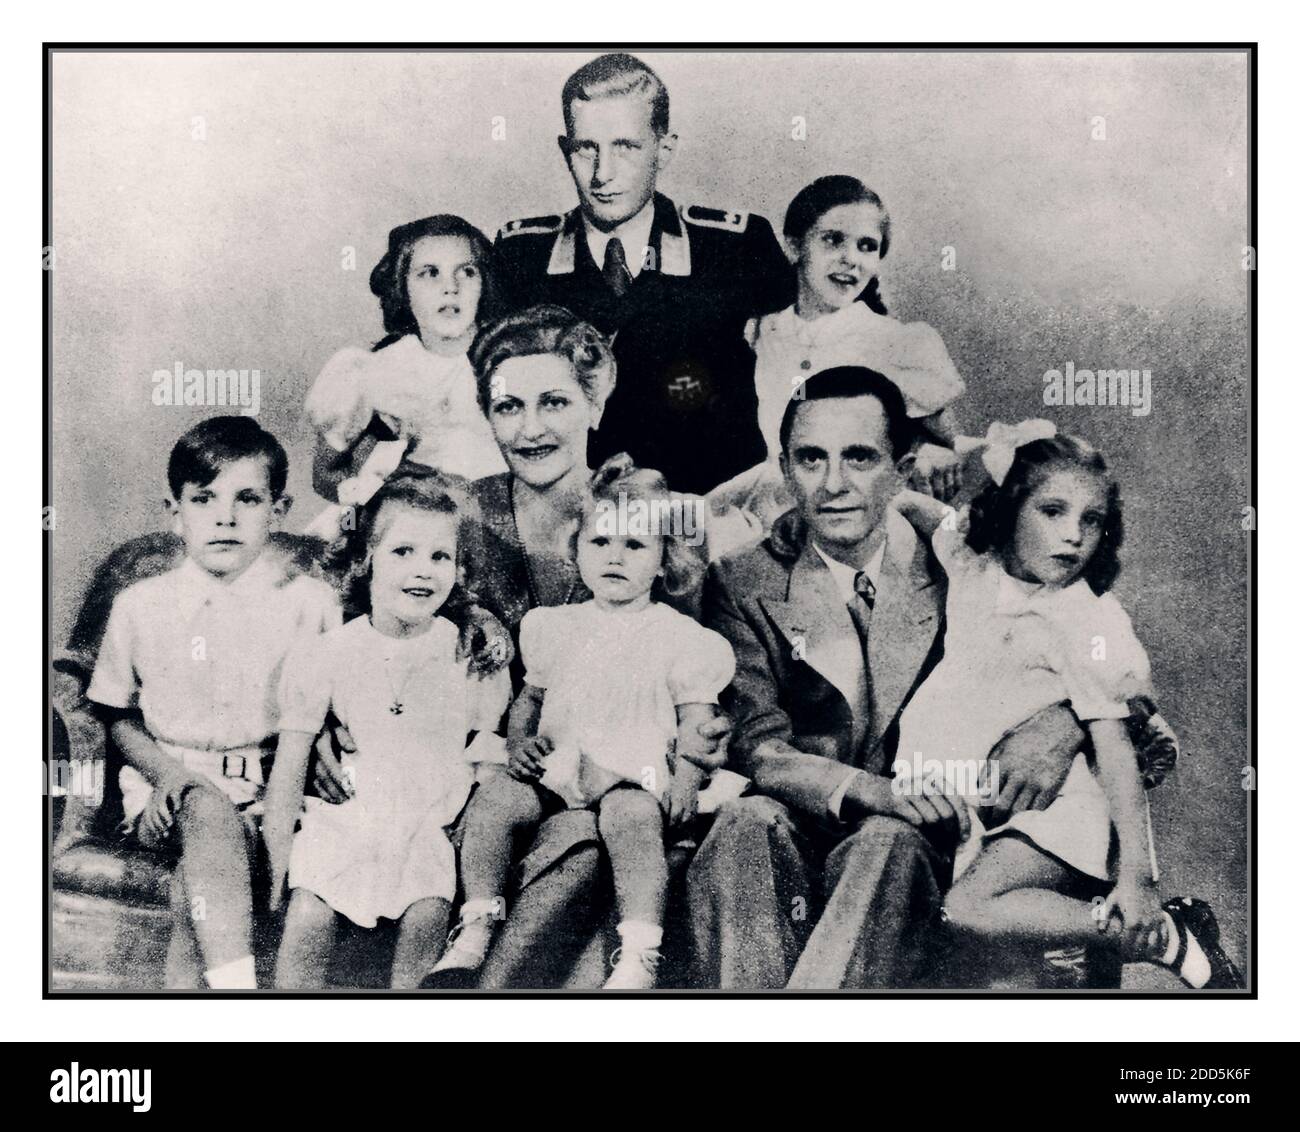 GOEBBELS FAMILY GROUP PHOTOGRAPH 1942 German Nazi politician and minister of propaganda Paul Joseph Goebbels (1897 - 1945) with his wife Magda and their children, Helga, Hildegard, Helmut, Hedwig, Holdine and Heidrun, 1942. Also ‘present’ is Harald Quandt (in uniform), his image subsequently retouched & dropped in to be part of group (Magda Goebbels' son by her first marriage.) With the fall of the Third Reich, Magda and Josef Goebbels poisoned their six children before both committing suicide. Hitlers Propaganda Minister Joseph Goebbels (1897-1945) Stock Photo